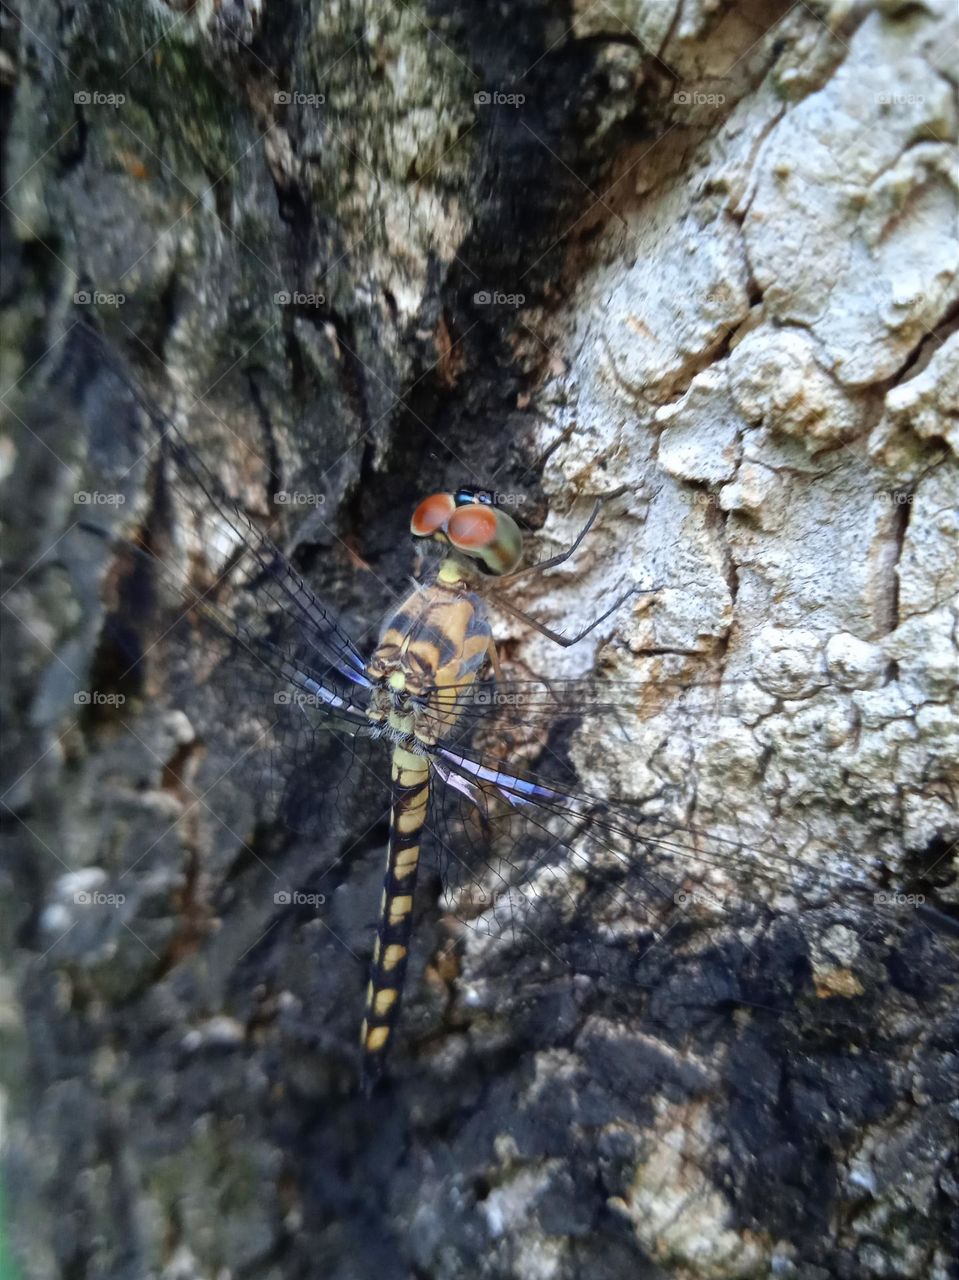 A beautiful dragonfly on the tree trunk.